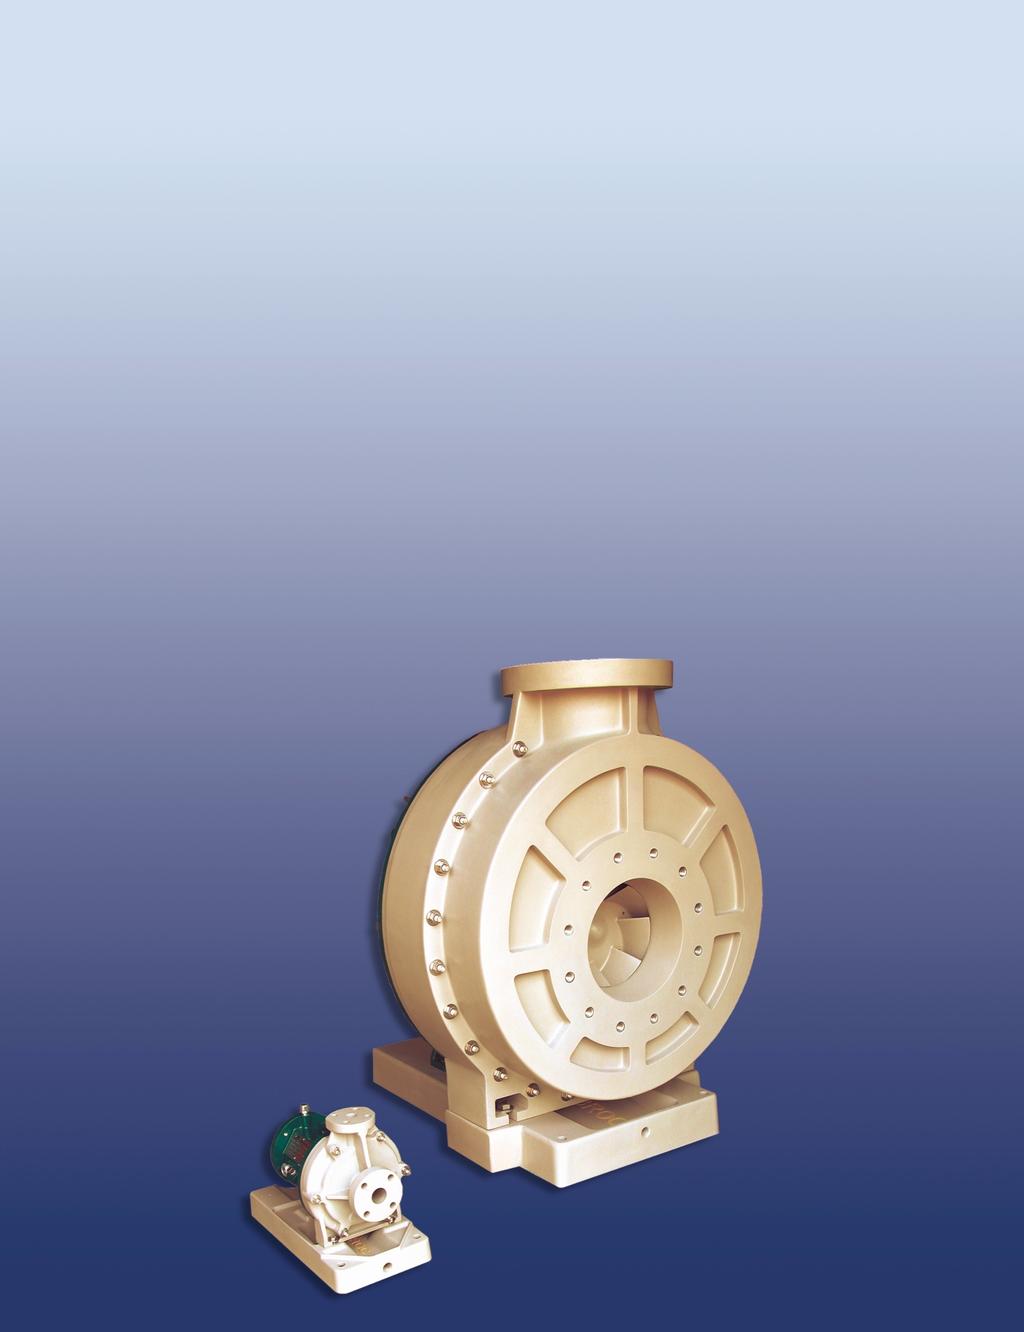 FYBROC THE LEADER IN CORROSION-RESISTANT FIBERGLASS PUMPING EQUIPMENT Fybroc is an advanced technology pump manufacturer specializing in reinforced composite centrifugal pumps, designed to handle